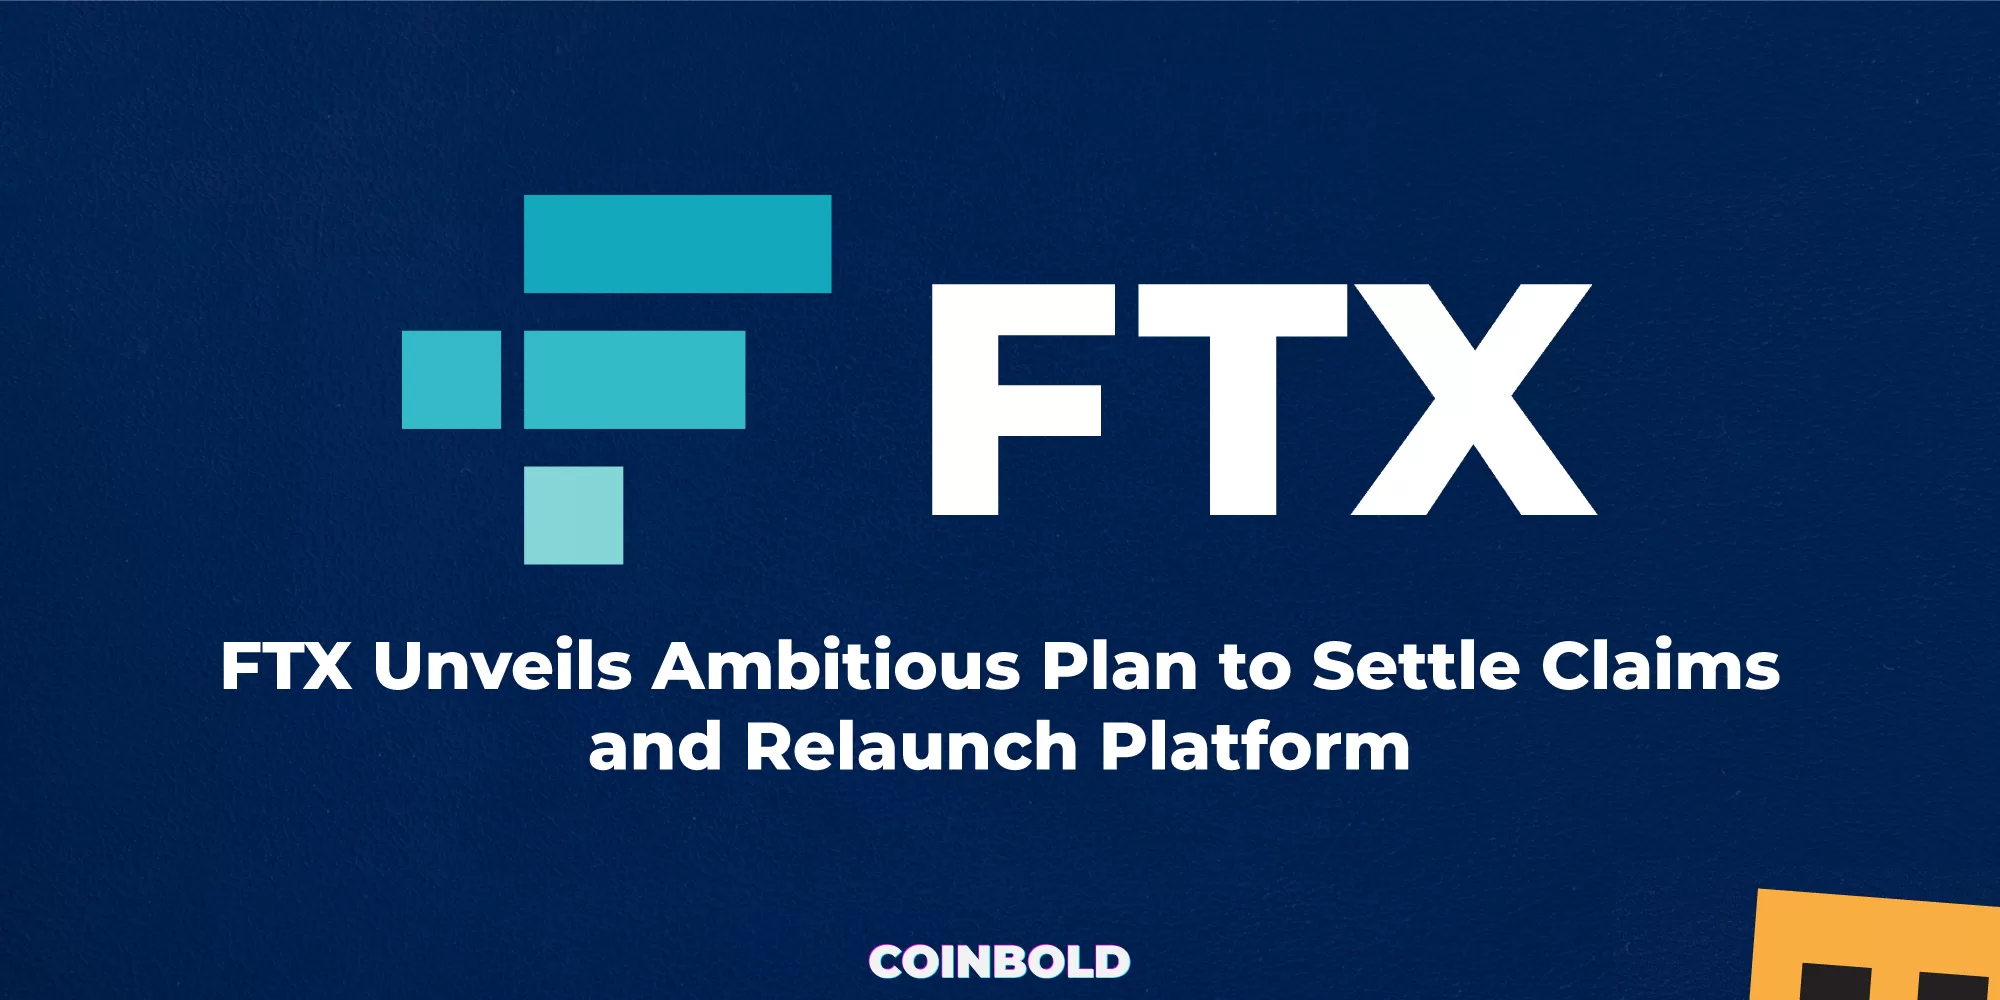 FTX Unveils Ambitious Plan to Settle Claims and Relaunch Platform